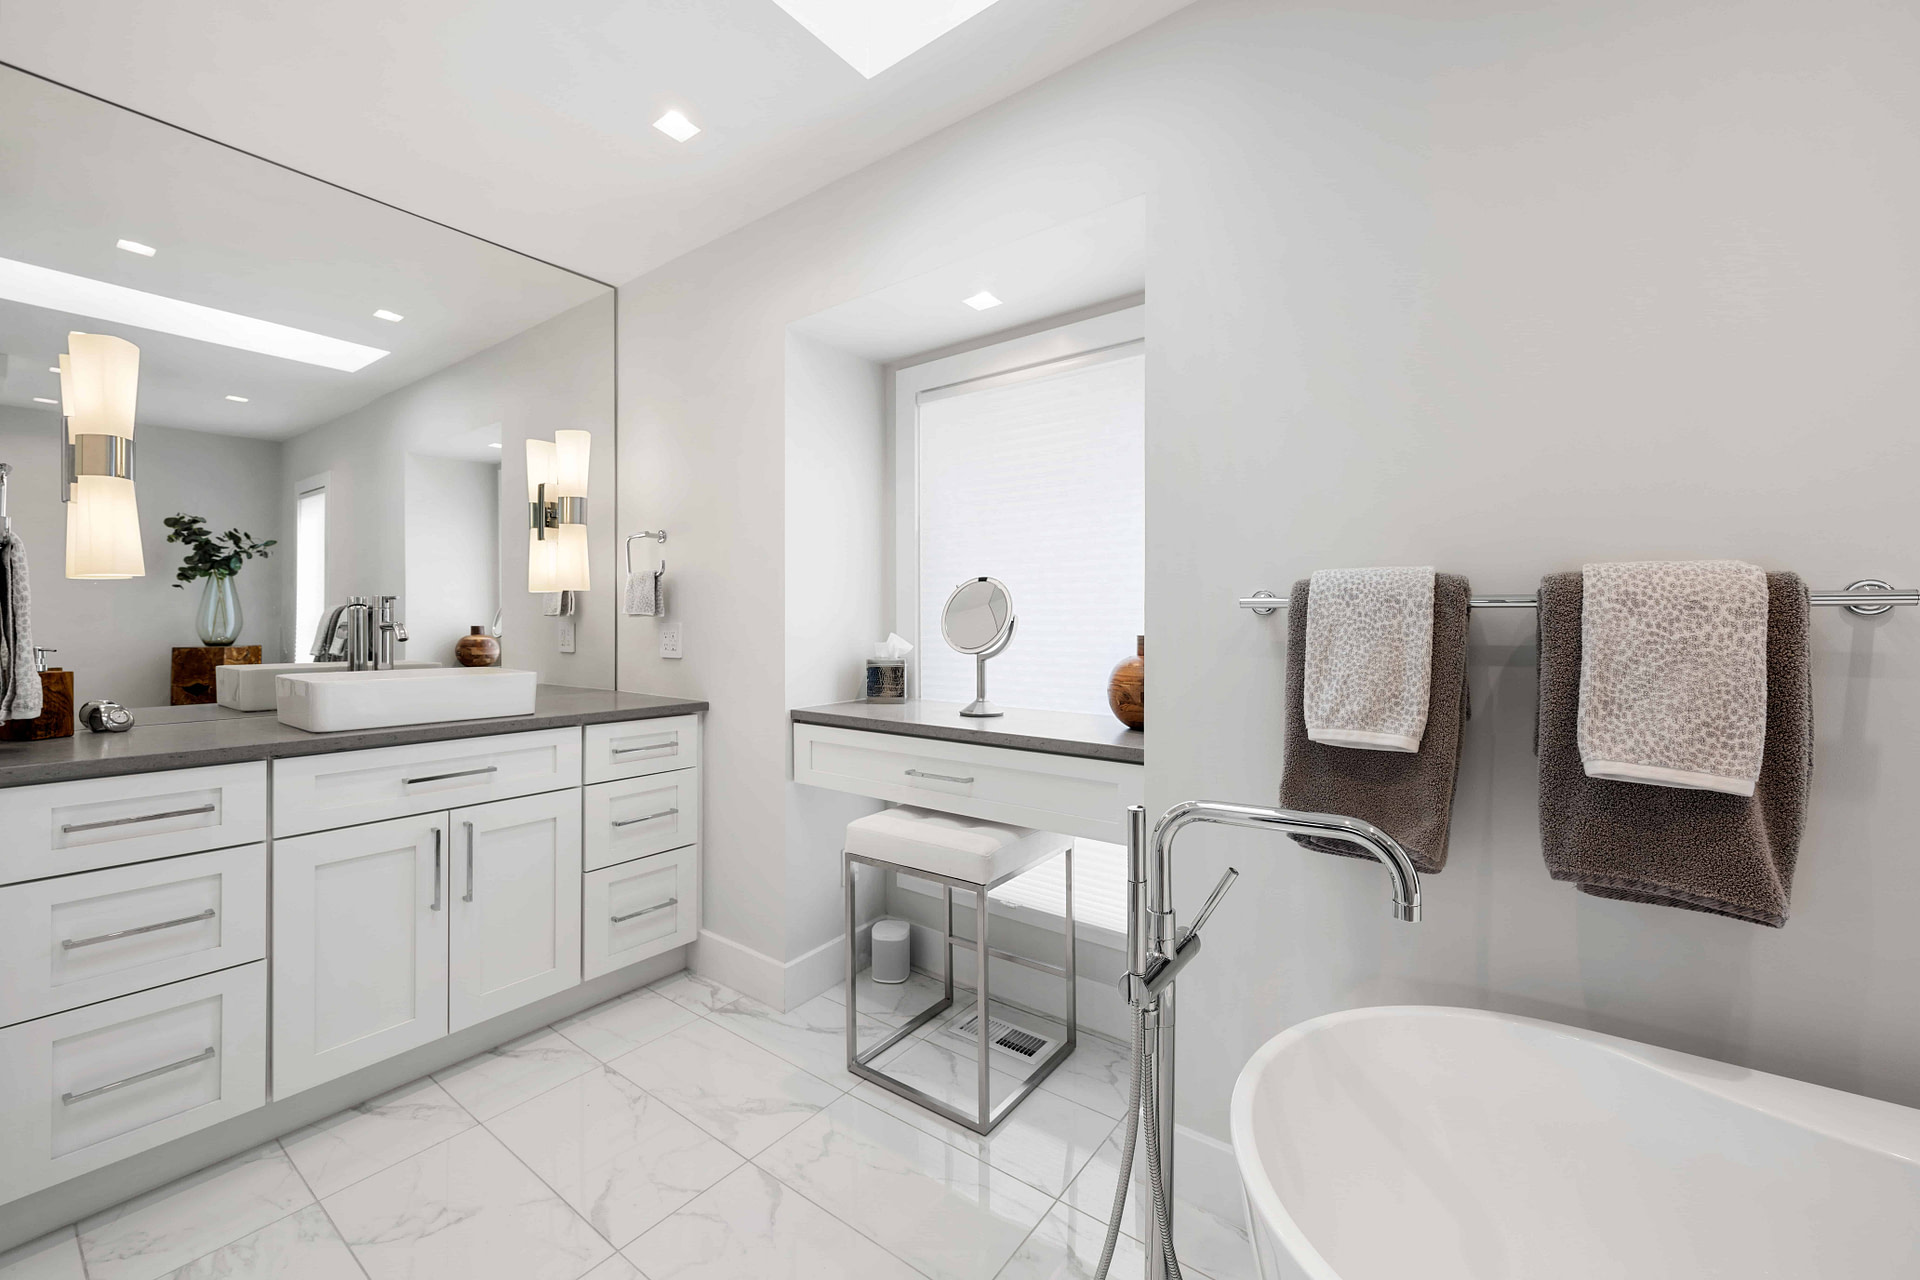 Bathroom Remodeling and Renovation in Northern Virginia